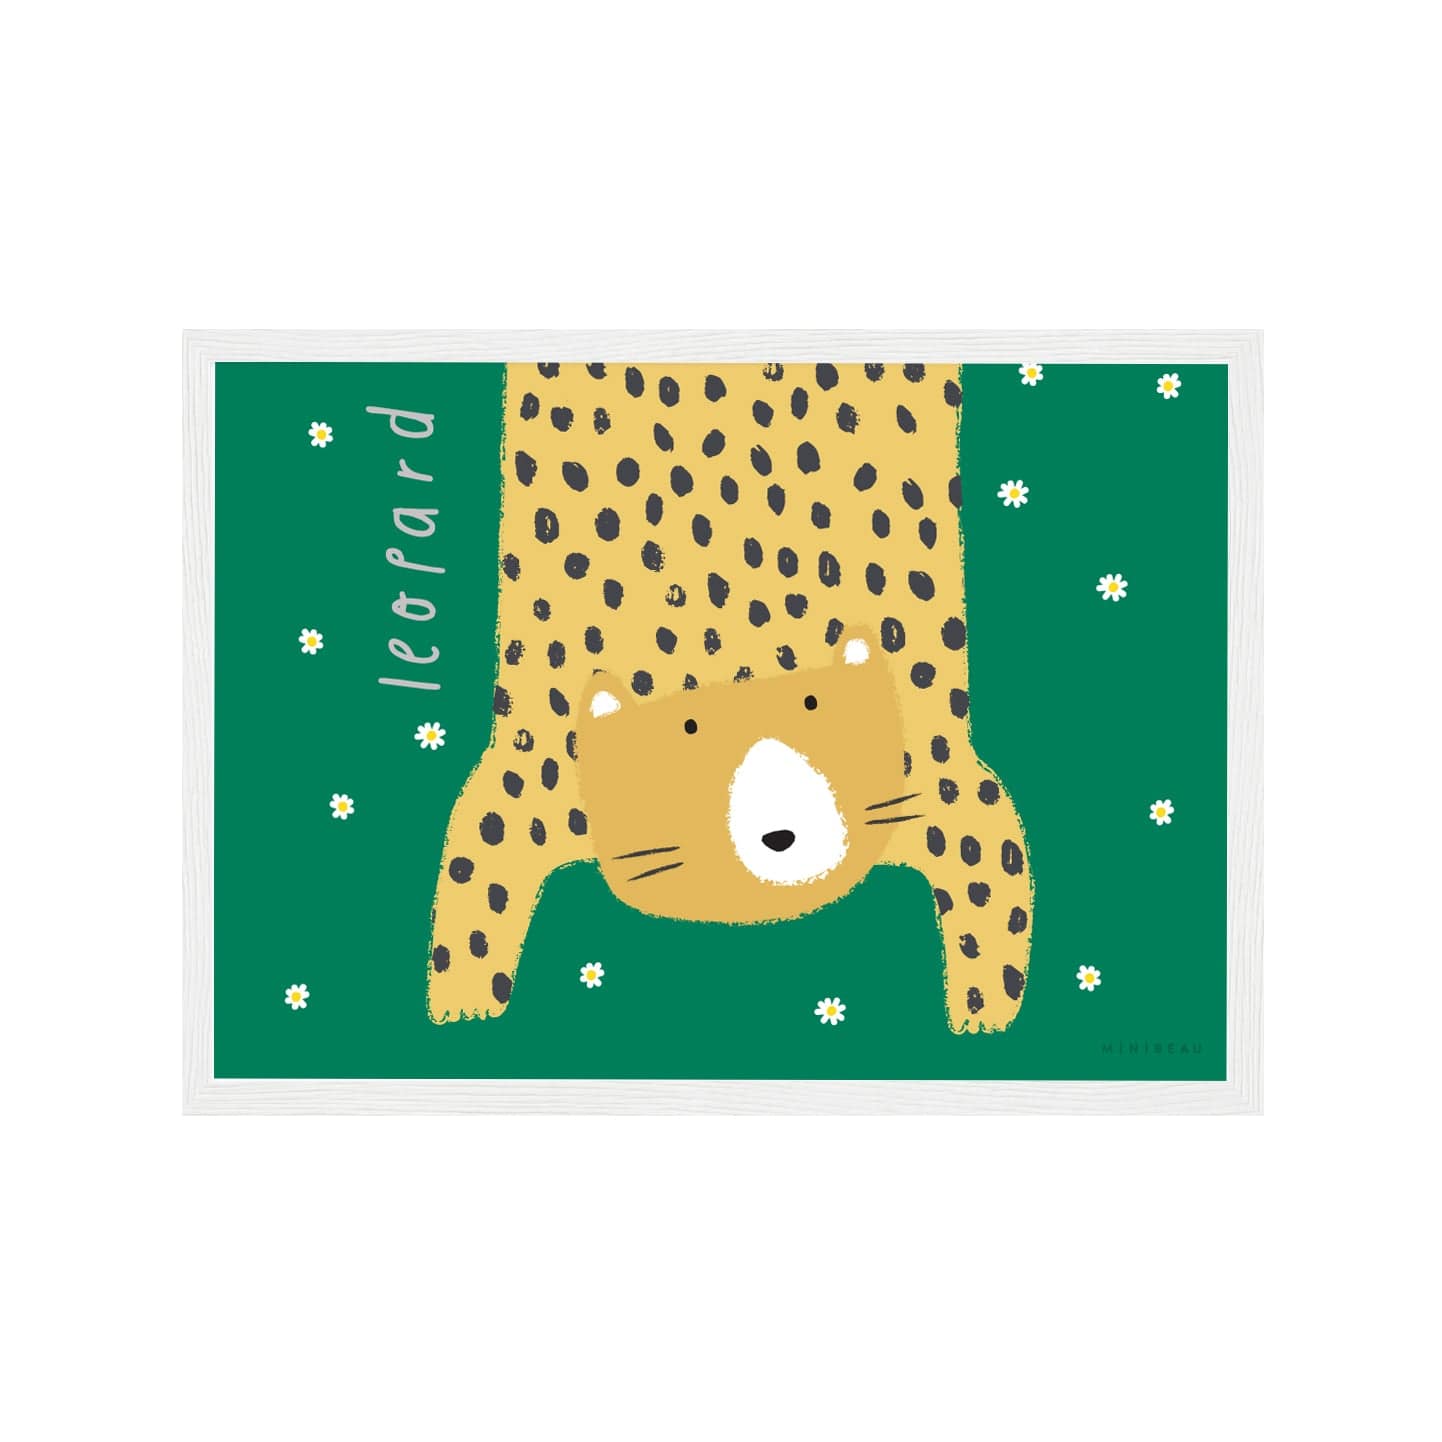 Our Leopard art print shows a hand-drawn leopard hanging down in to the picture, lifting it's head to look out at us on a green background with falling daisies, with the word leopard written alongside it, in a white wooden frame